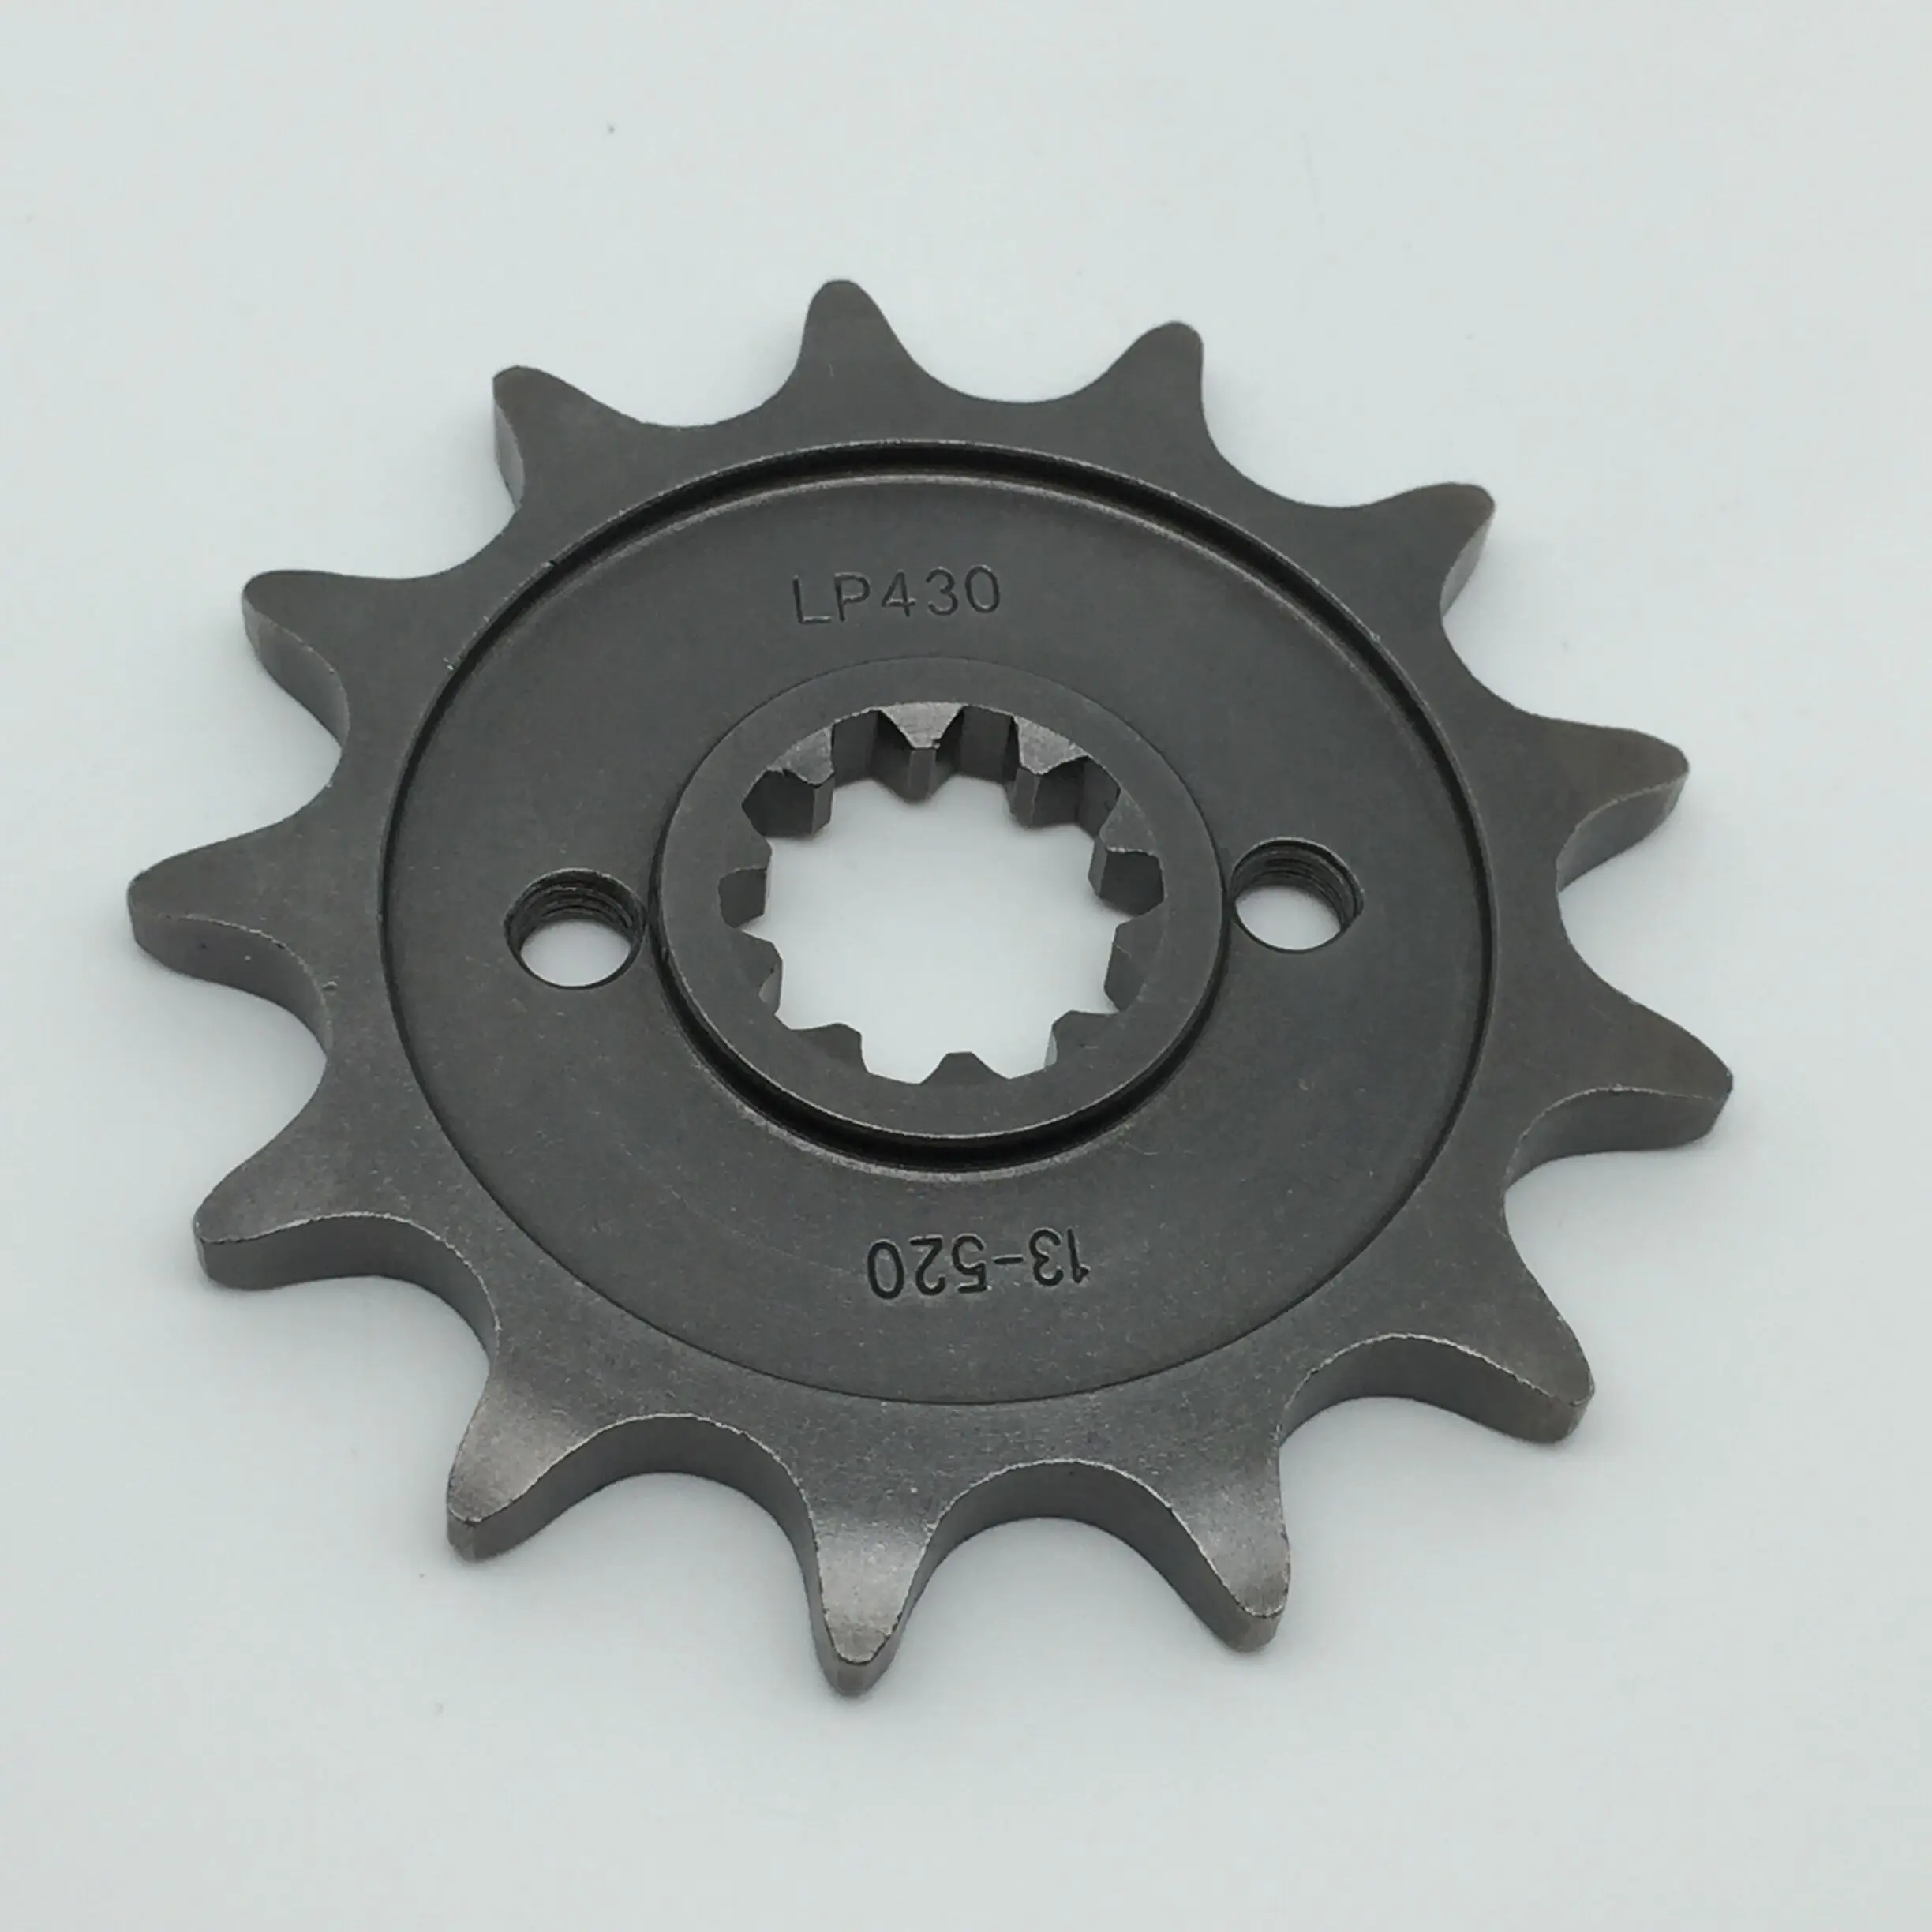 1Pc Motorcycle Front Pinion Sprocket Chain Motorcycles Drive Gears AccessoriesH$